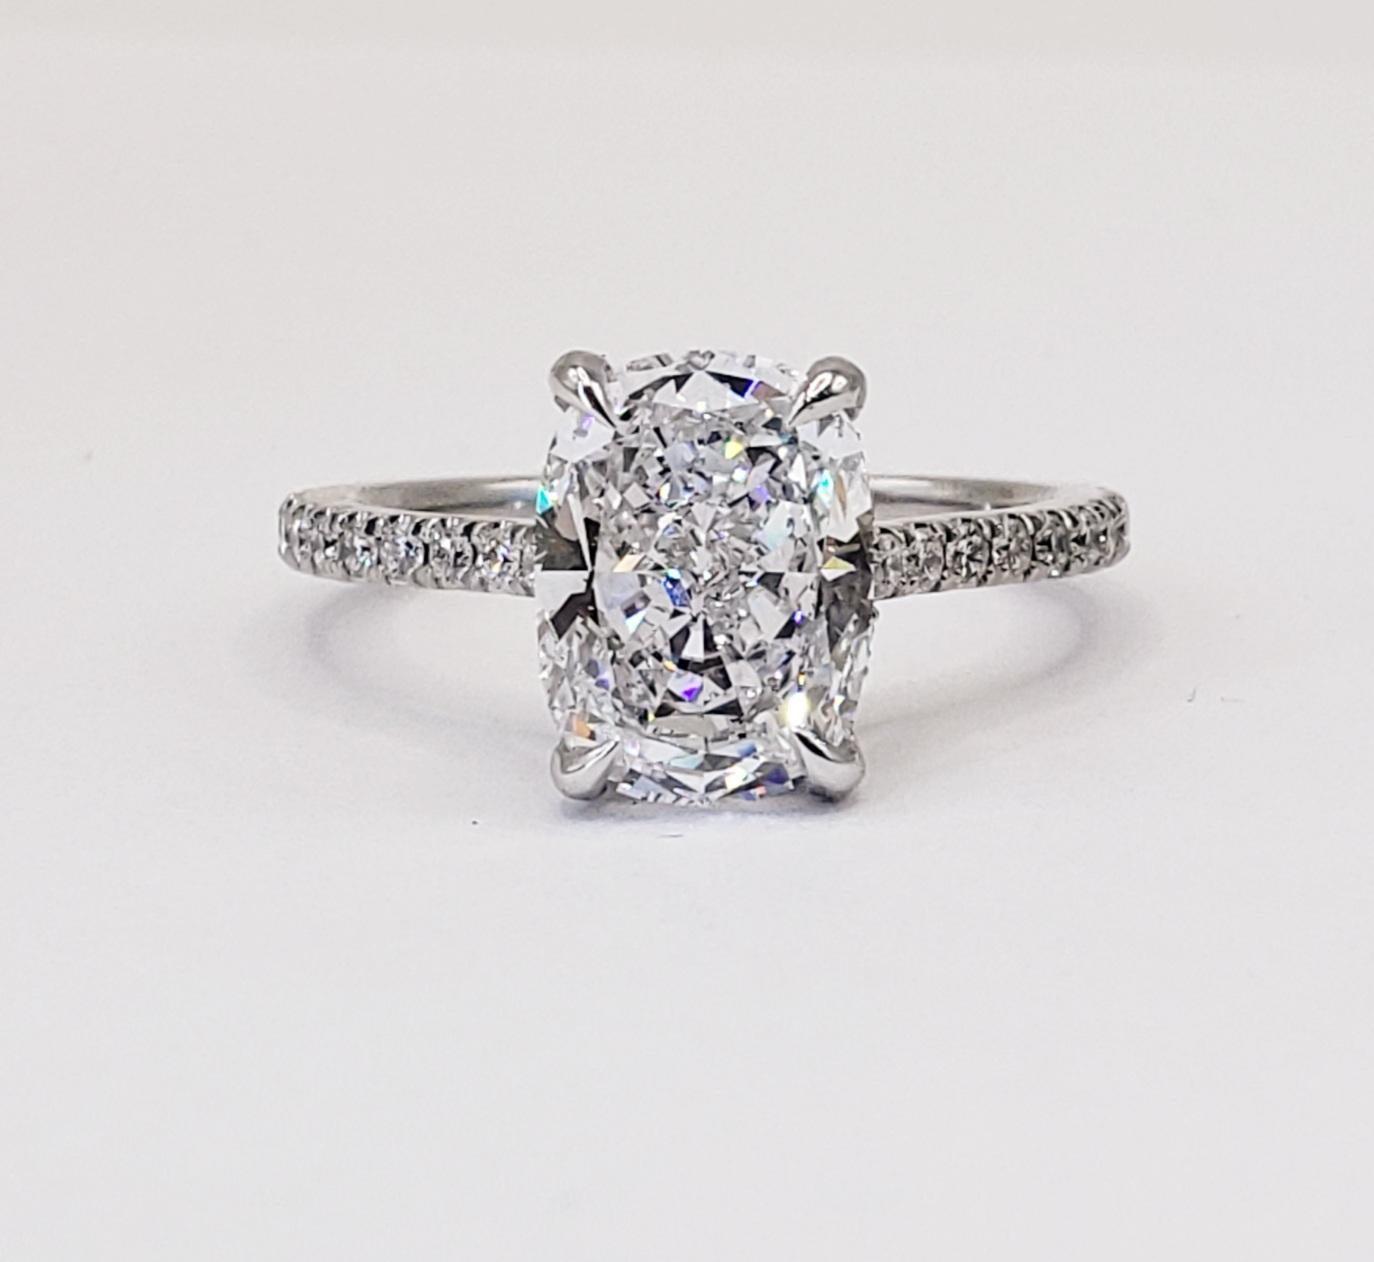 Rosenberg Diamonds & Co. 3.04 carat Cushion cut D color SI1 clarity is accompanied by a GIA certificate. This spectacular elongated Cushion is full of brilliance and it is set in a handmade platinum setting. This ring continues its elegance with a